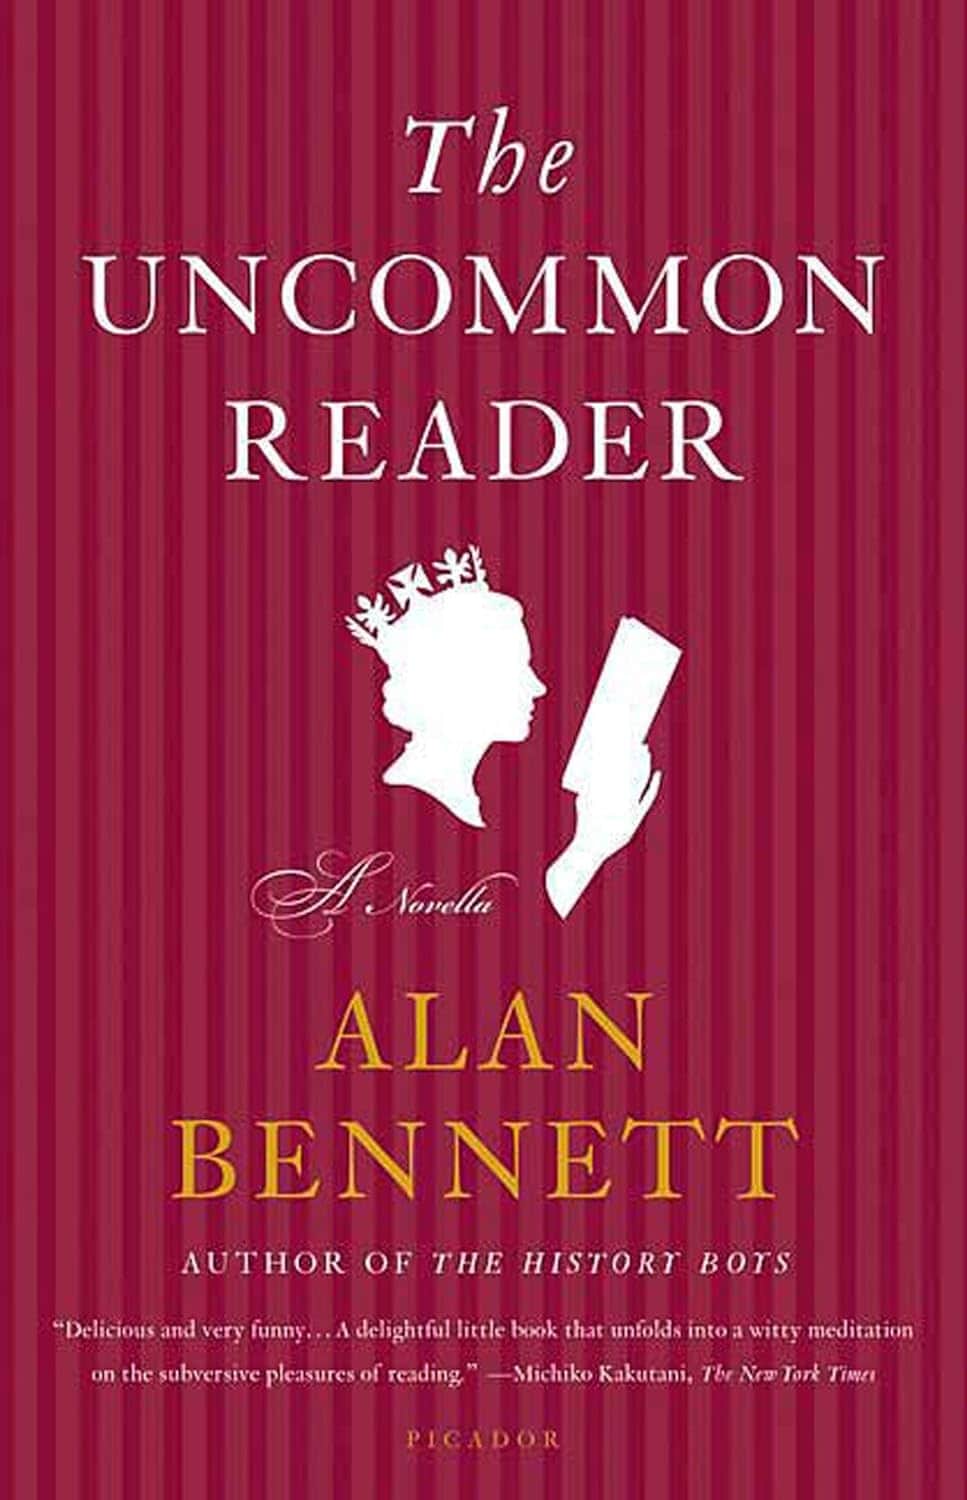 The Uncommon Reader - By Alan Bennett